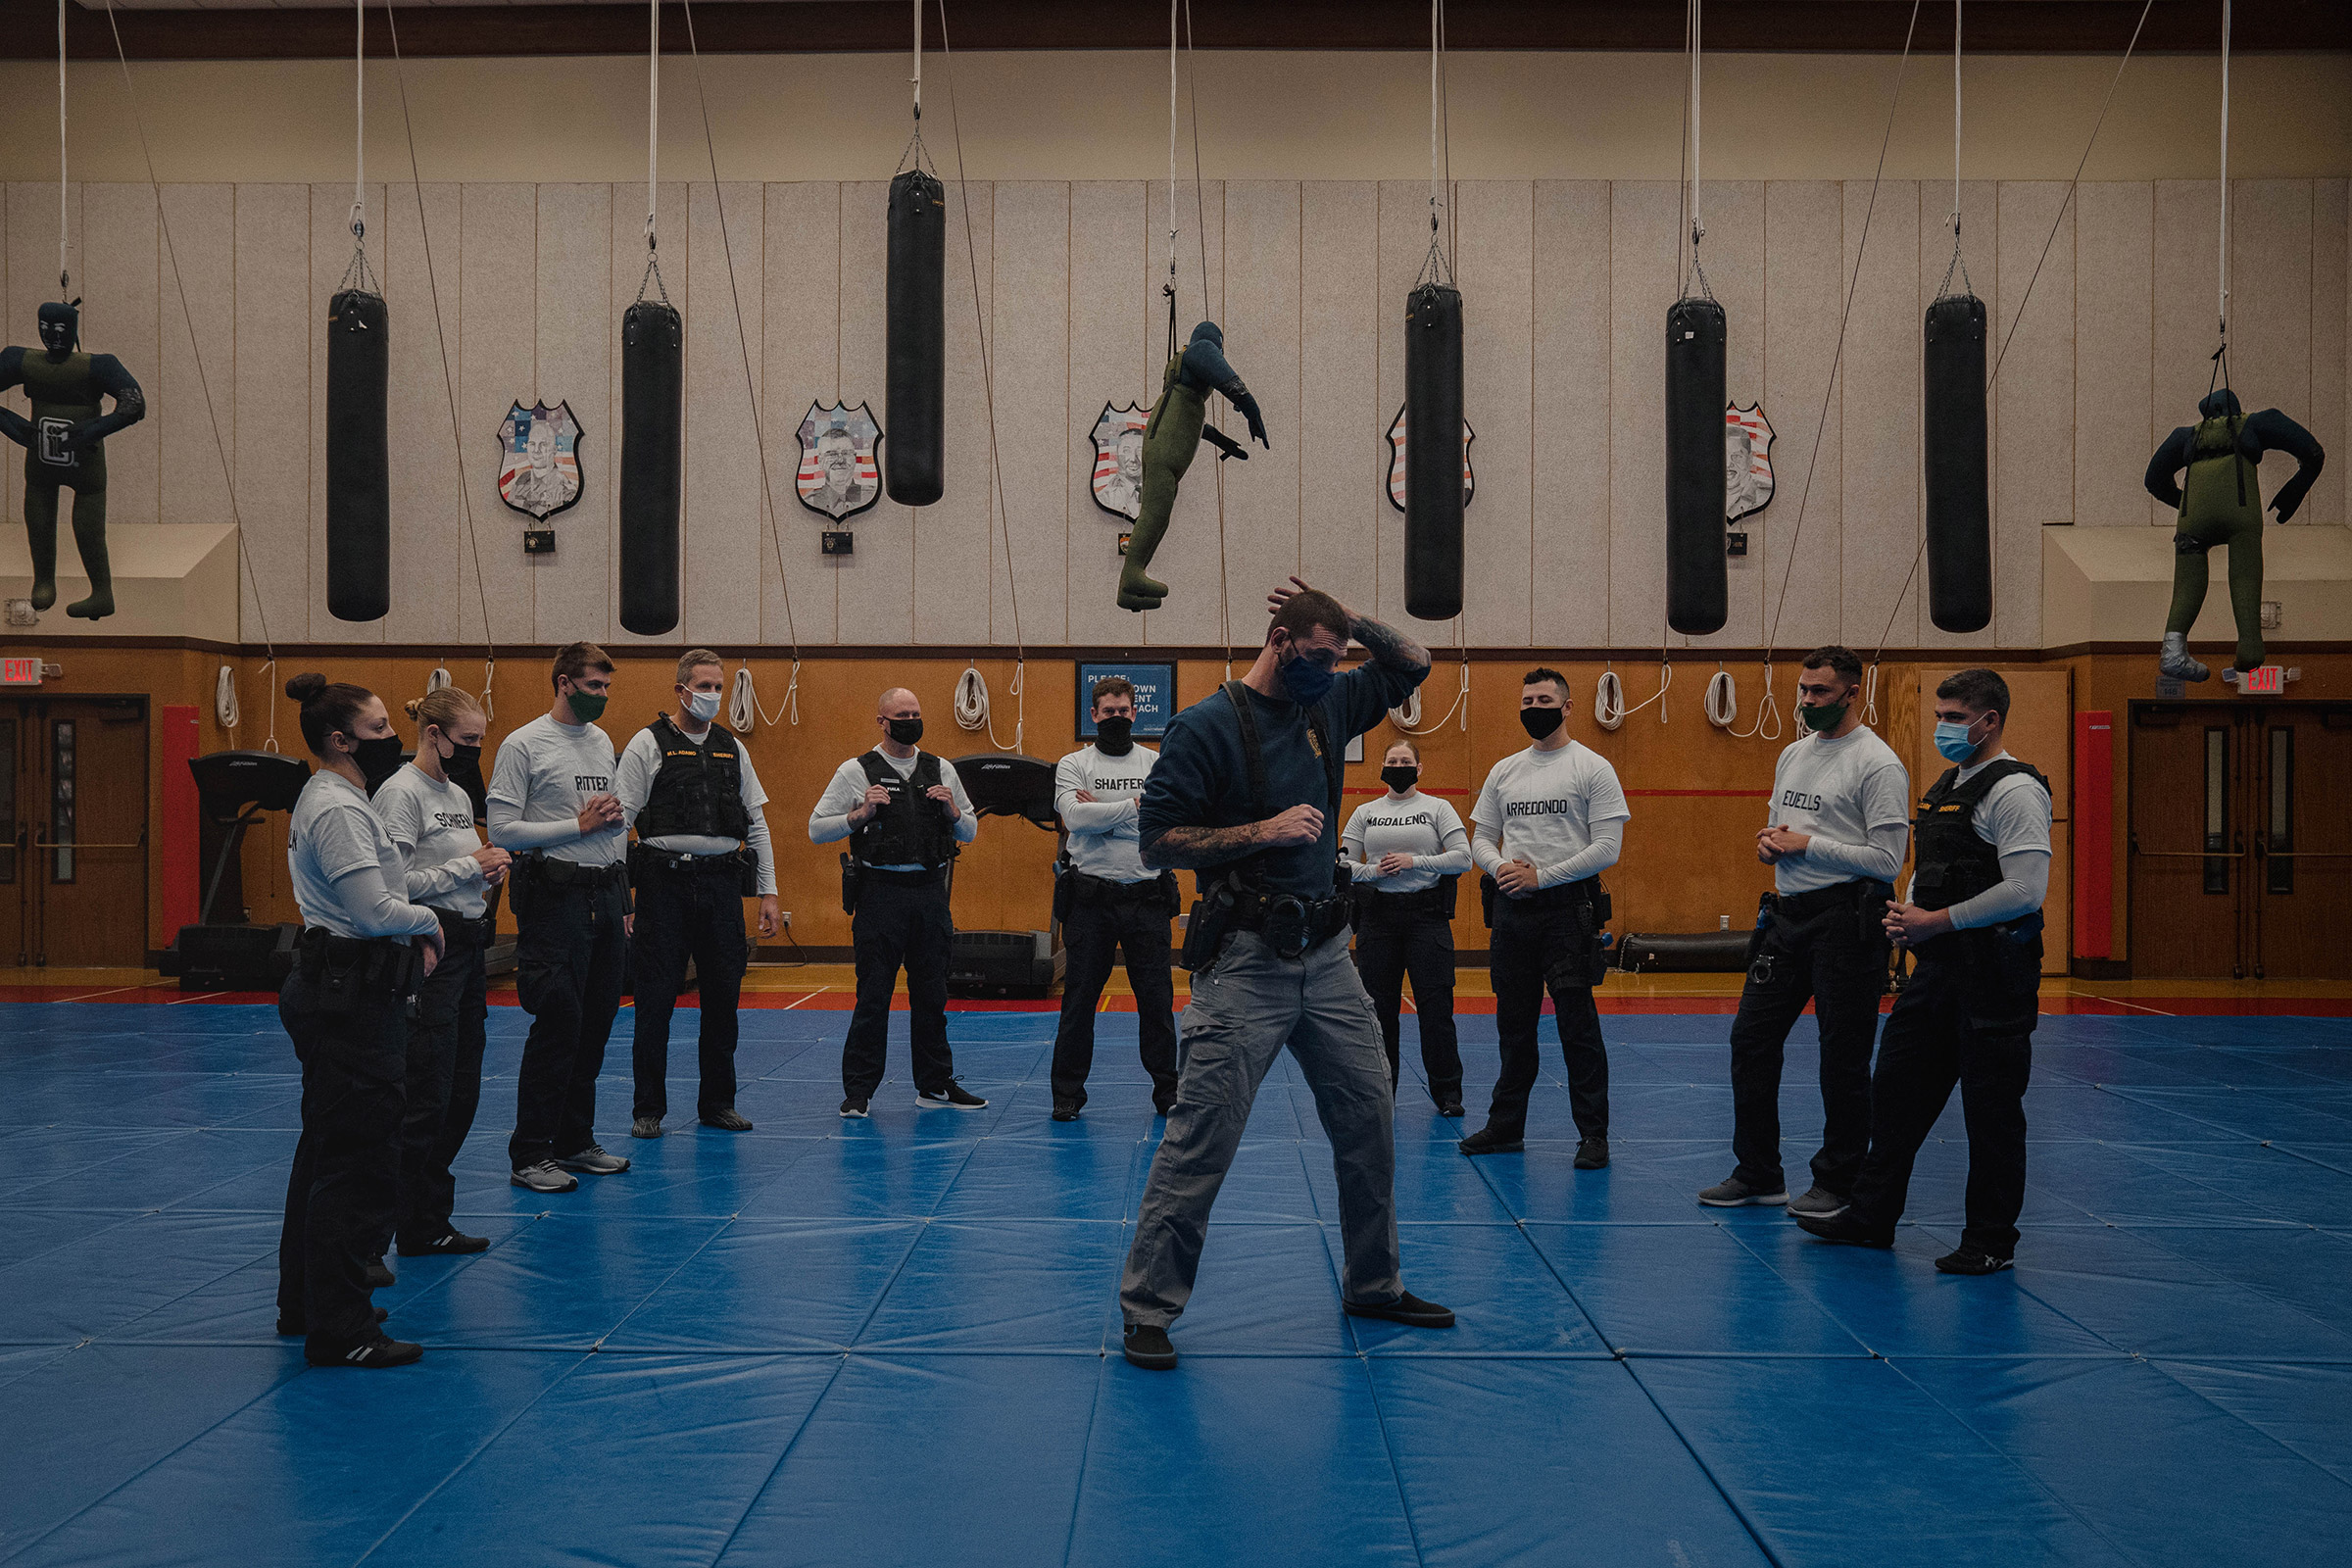 With punching bags and dummies overhead, instructor Javier Sola <a href="https://time.com/5901726/police-training-academies/" target="_blank" rel="noopener noreferrer">teaches frisking and handcuffing techniques</a> to recruits at the Washington State Criminal Justice Training Commission facility in Burien, Wash., on Oct. 22. Washington State is one of the few places in the U.S. that requires all recruits to go through the state-run Basic Law Enforcement Academy, except for those becoming state patrol officers, a system that advocates of police reform support. (Jovelle Tamayo for TIME)